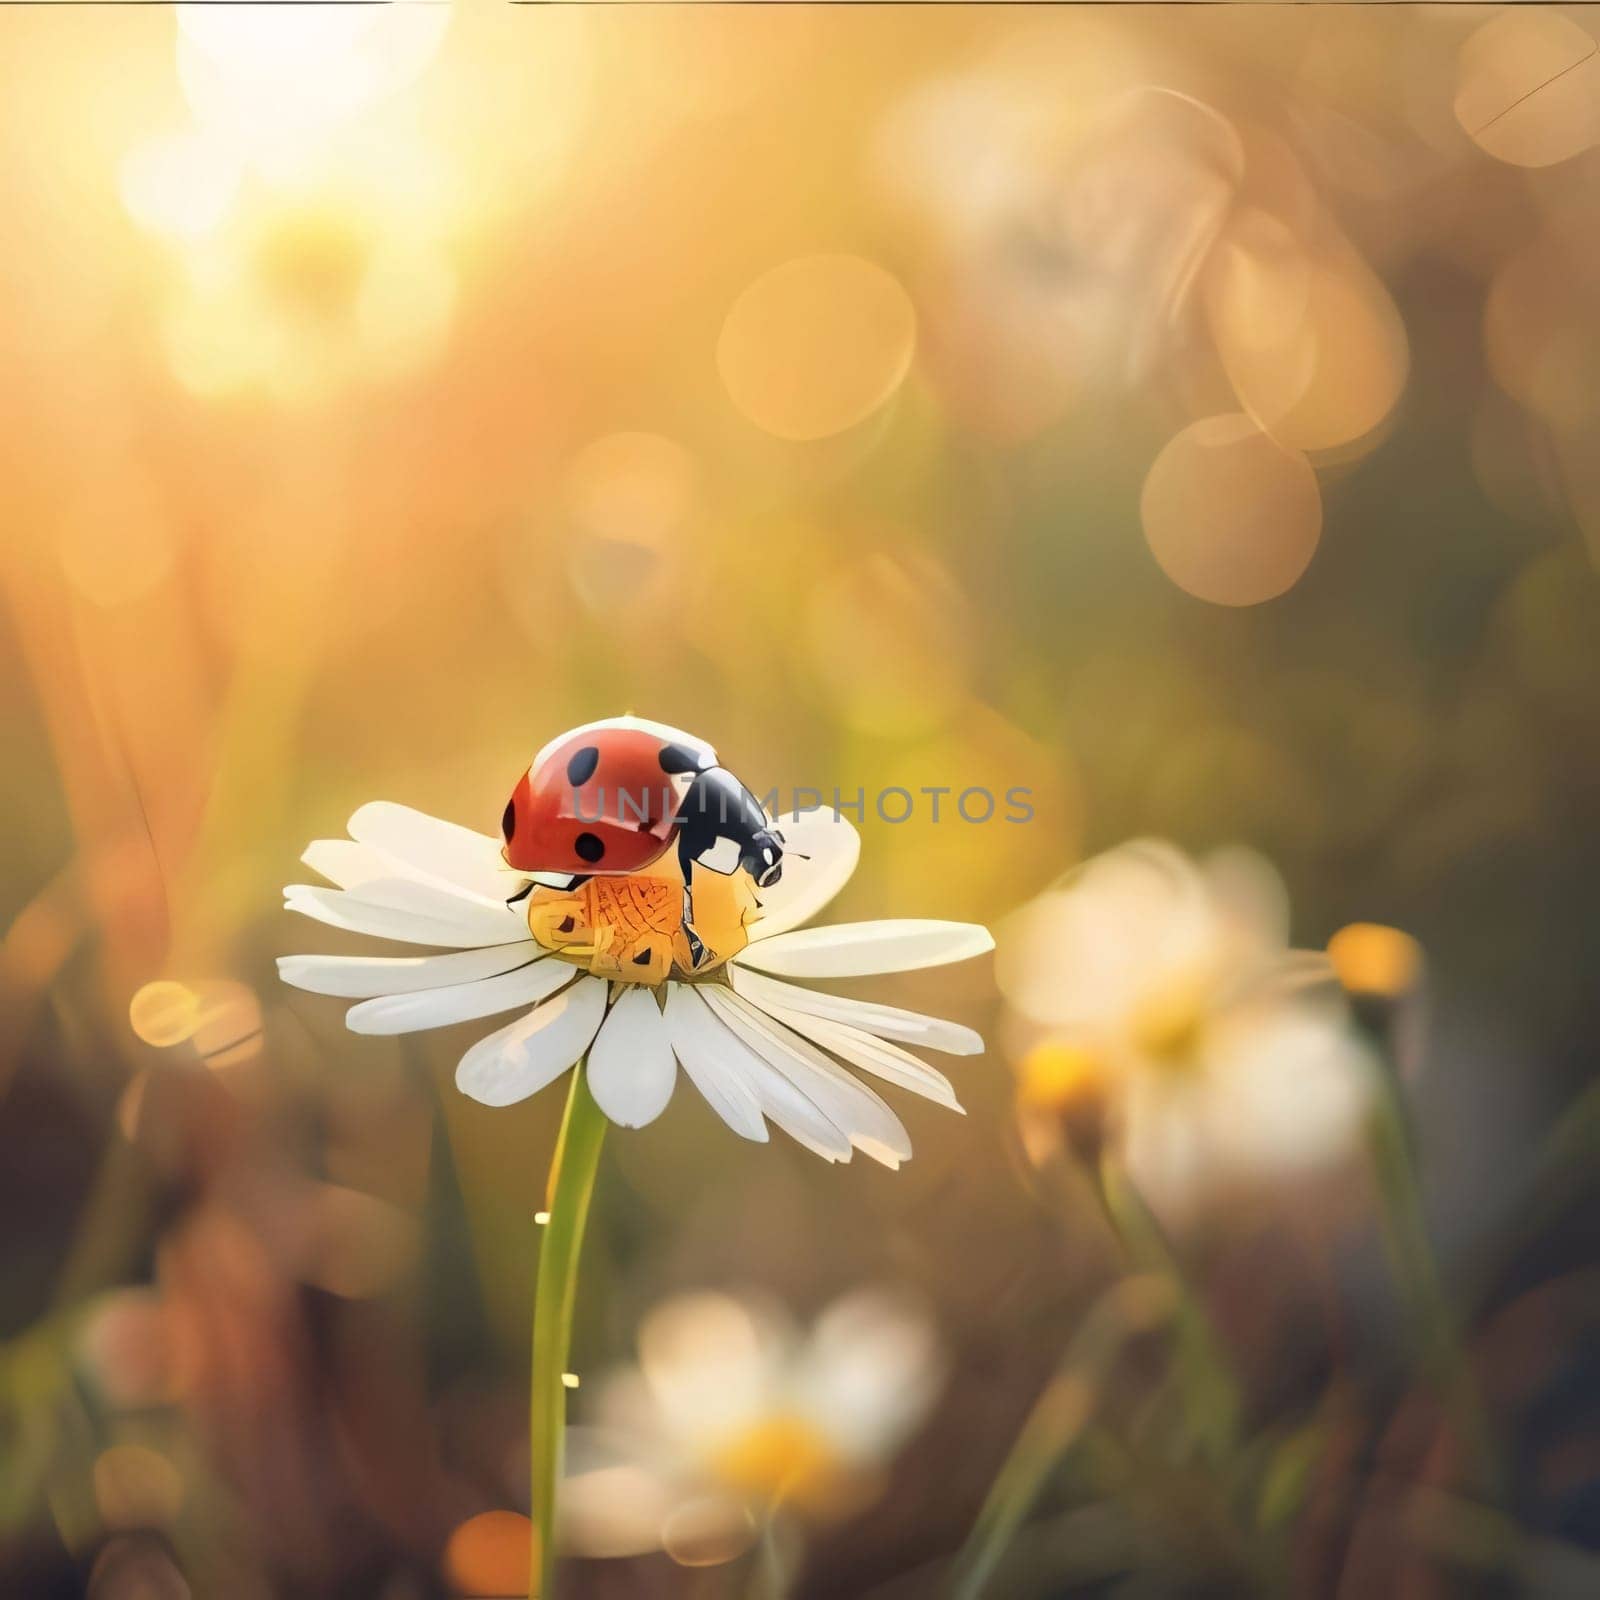 Red ladybug sitting on a white flower, smudged background sunset rays. Flowering flowers, a symbol of spring, new life. A joyful time of nature awakening to life.